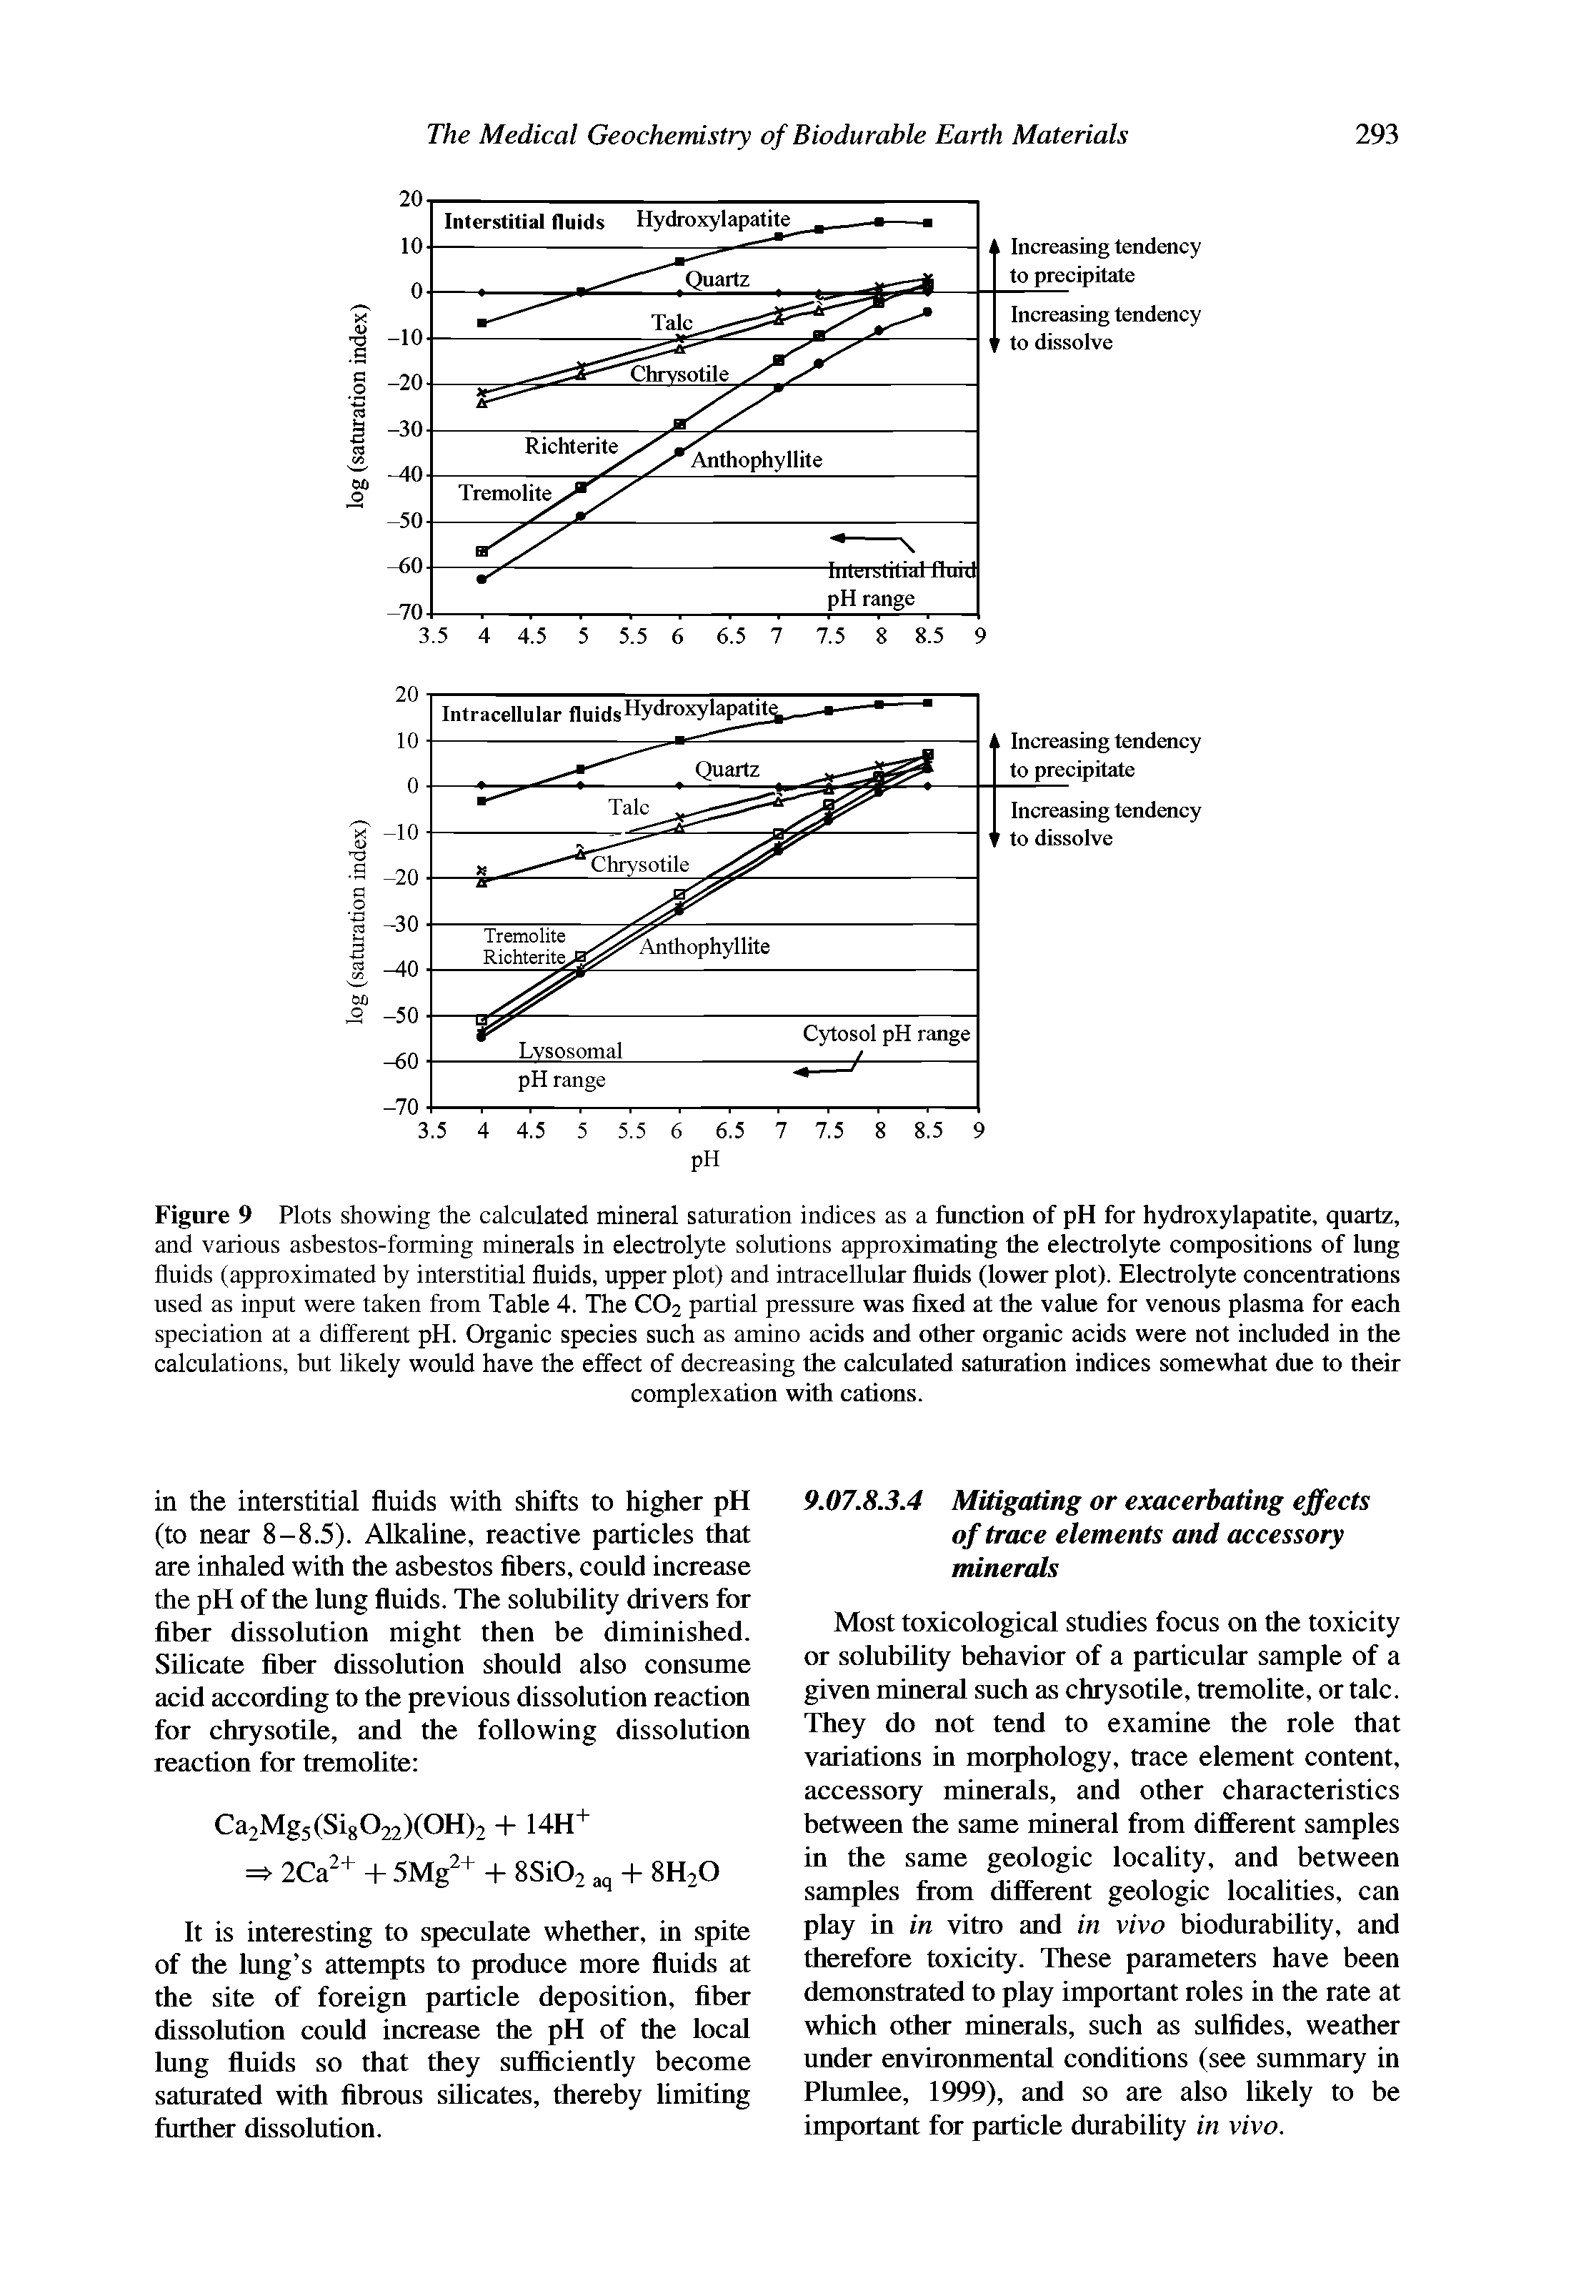 Figure 9 Plots showing the calculated mineral saturation indices as a function of pH for hydroxylapatite, quartz, and various asbestos-forming minerals in electrolyte solutions approximating the electrol)he compositions of lung fluids (approximated by interstitial fluids, upper plot) and intracellular fluids (lower plot). Electrolyte concentrations used as input were taken from Table 4. The CO2 partial pressure was fixed at the value for venous plasma for each speciation at a different pH. Organic species such as amino acids and other organic acids were not included in the calculations, but likely would have the effect of decreasing the calculated saturation indices somewhat due to their...